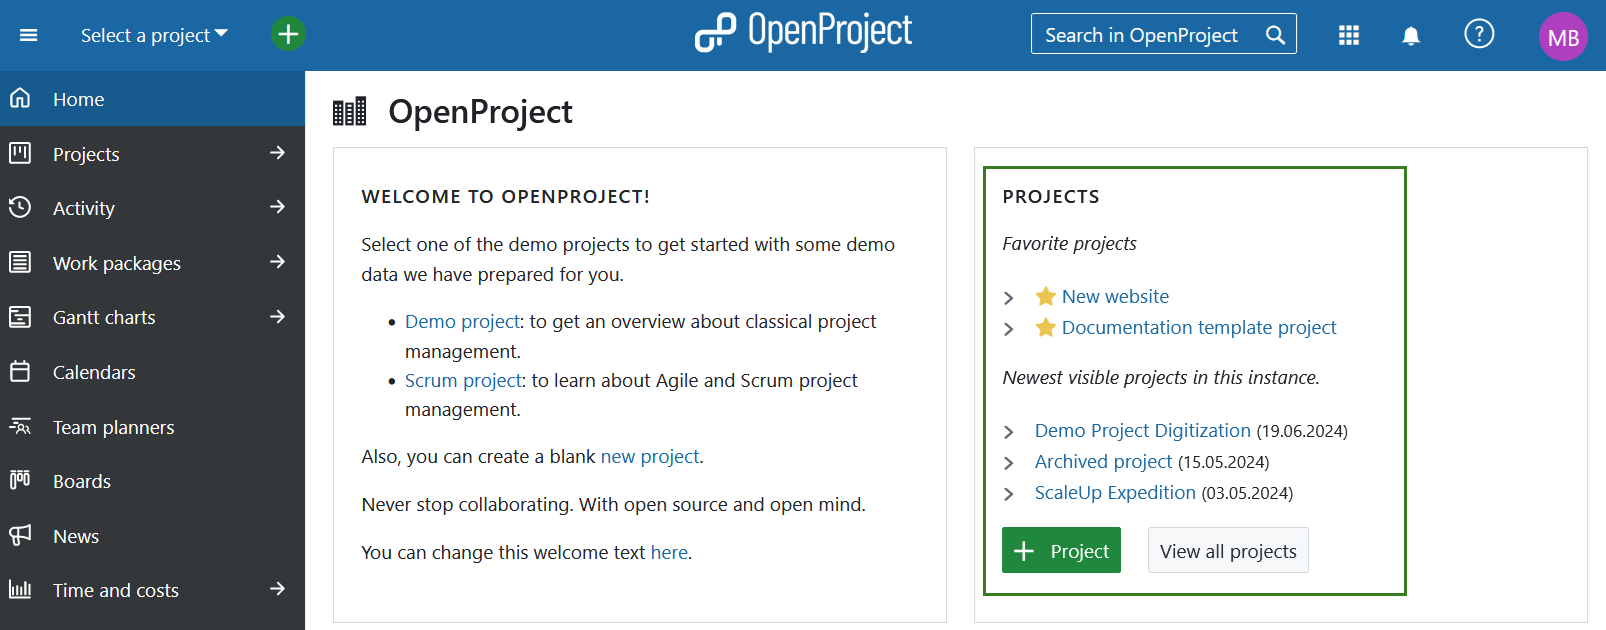 openproject landing page